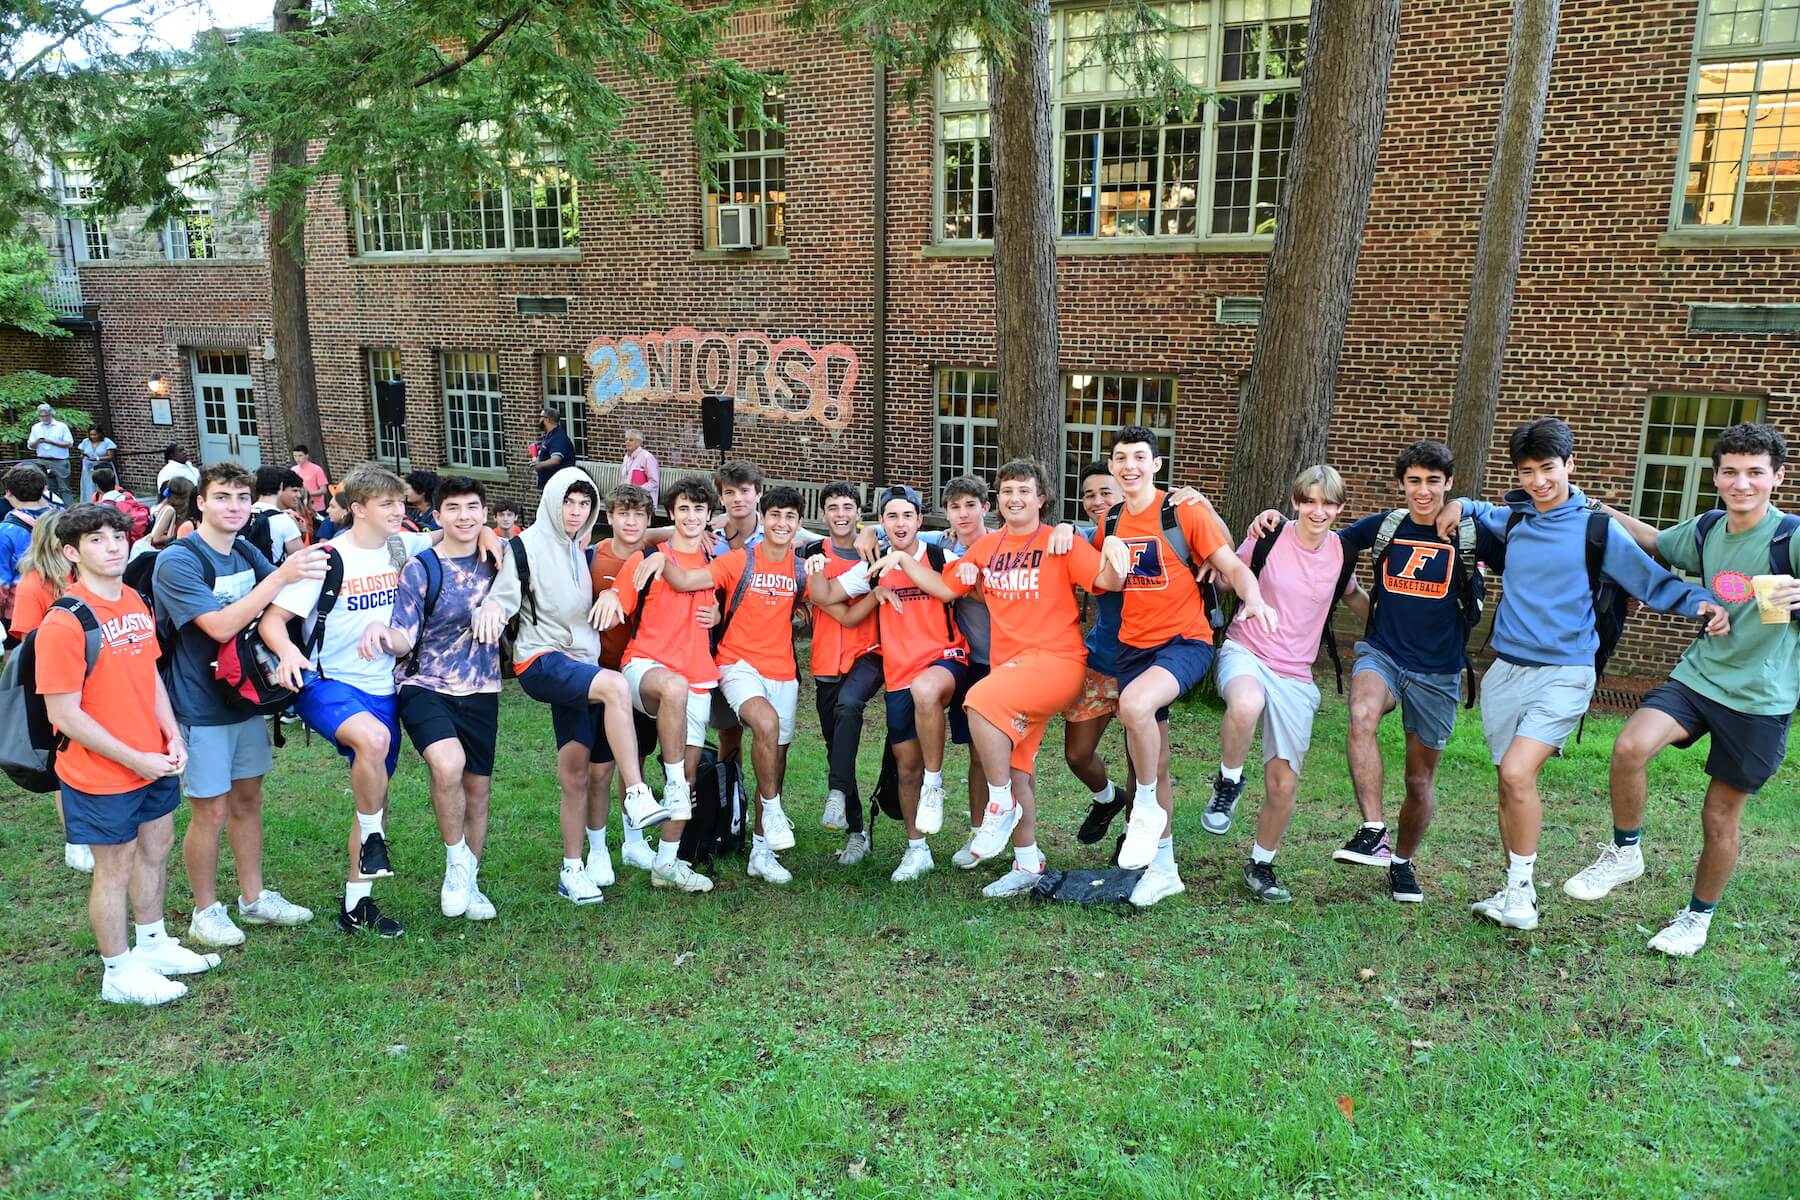 Ethical Culture Fieldston School Upper School students gather on the Quad on the first day of school